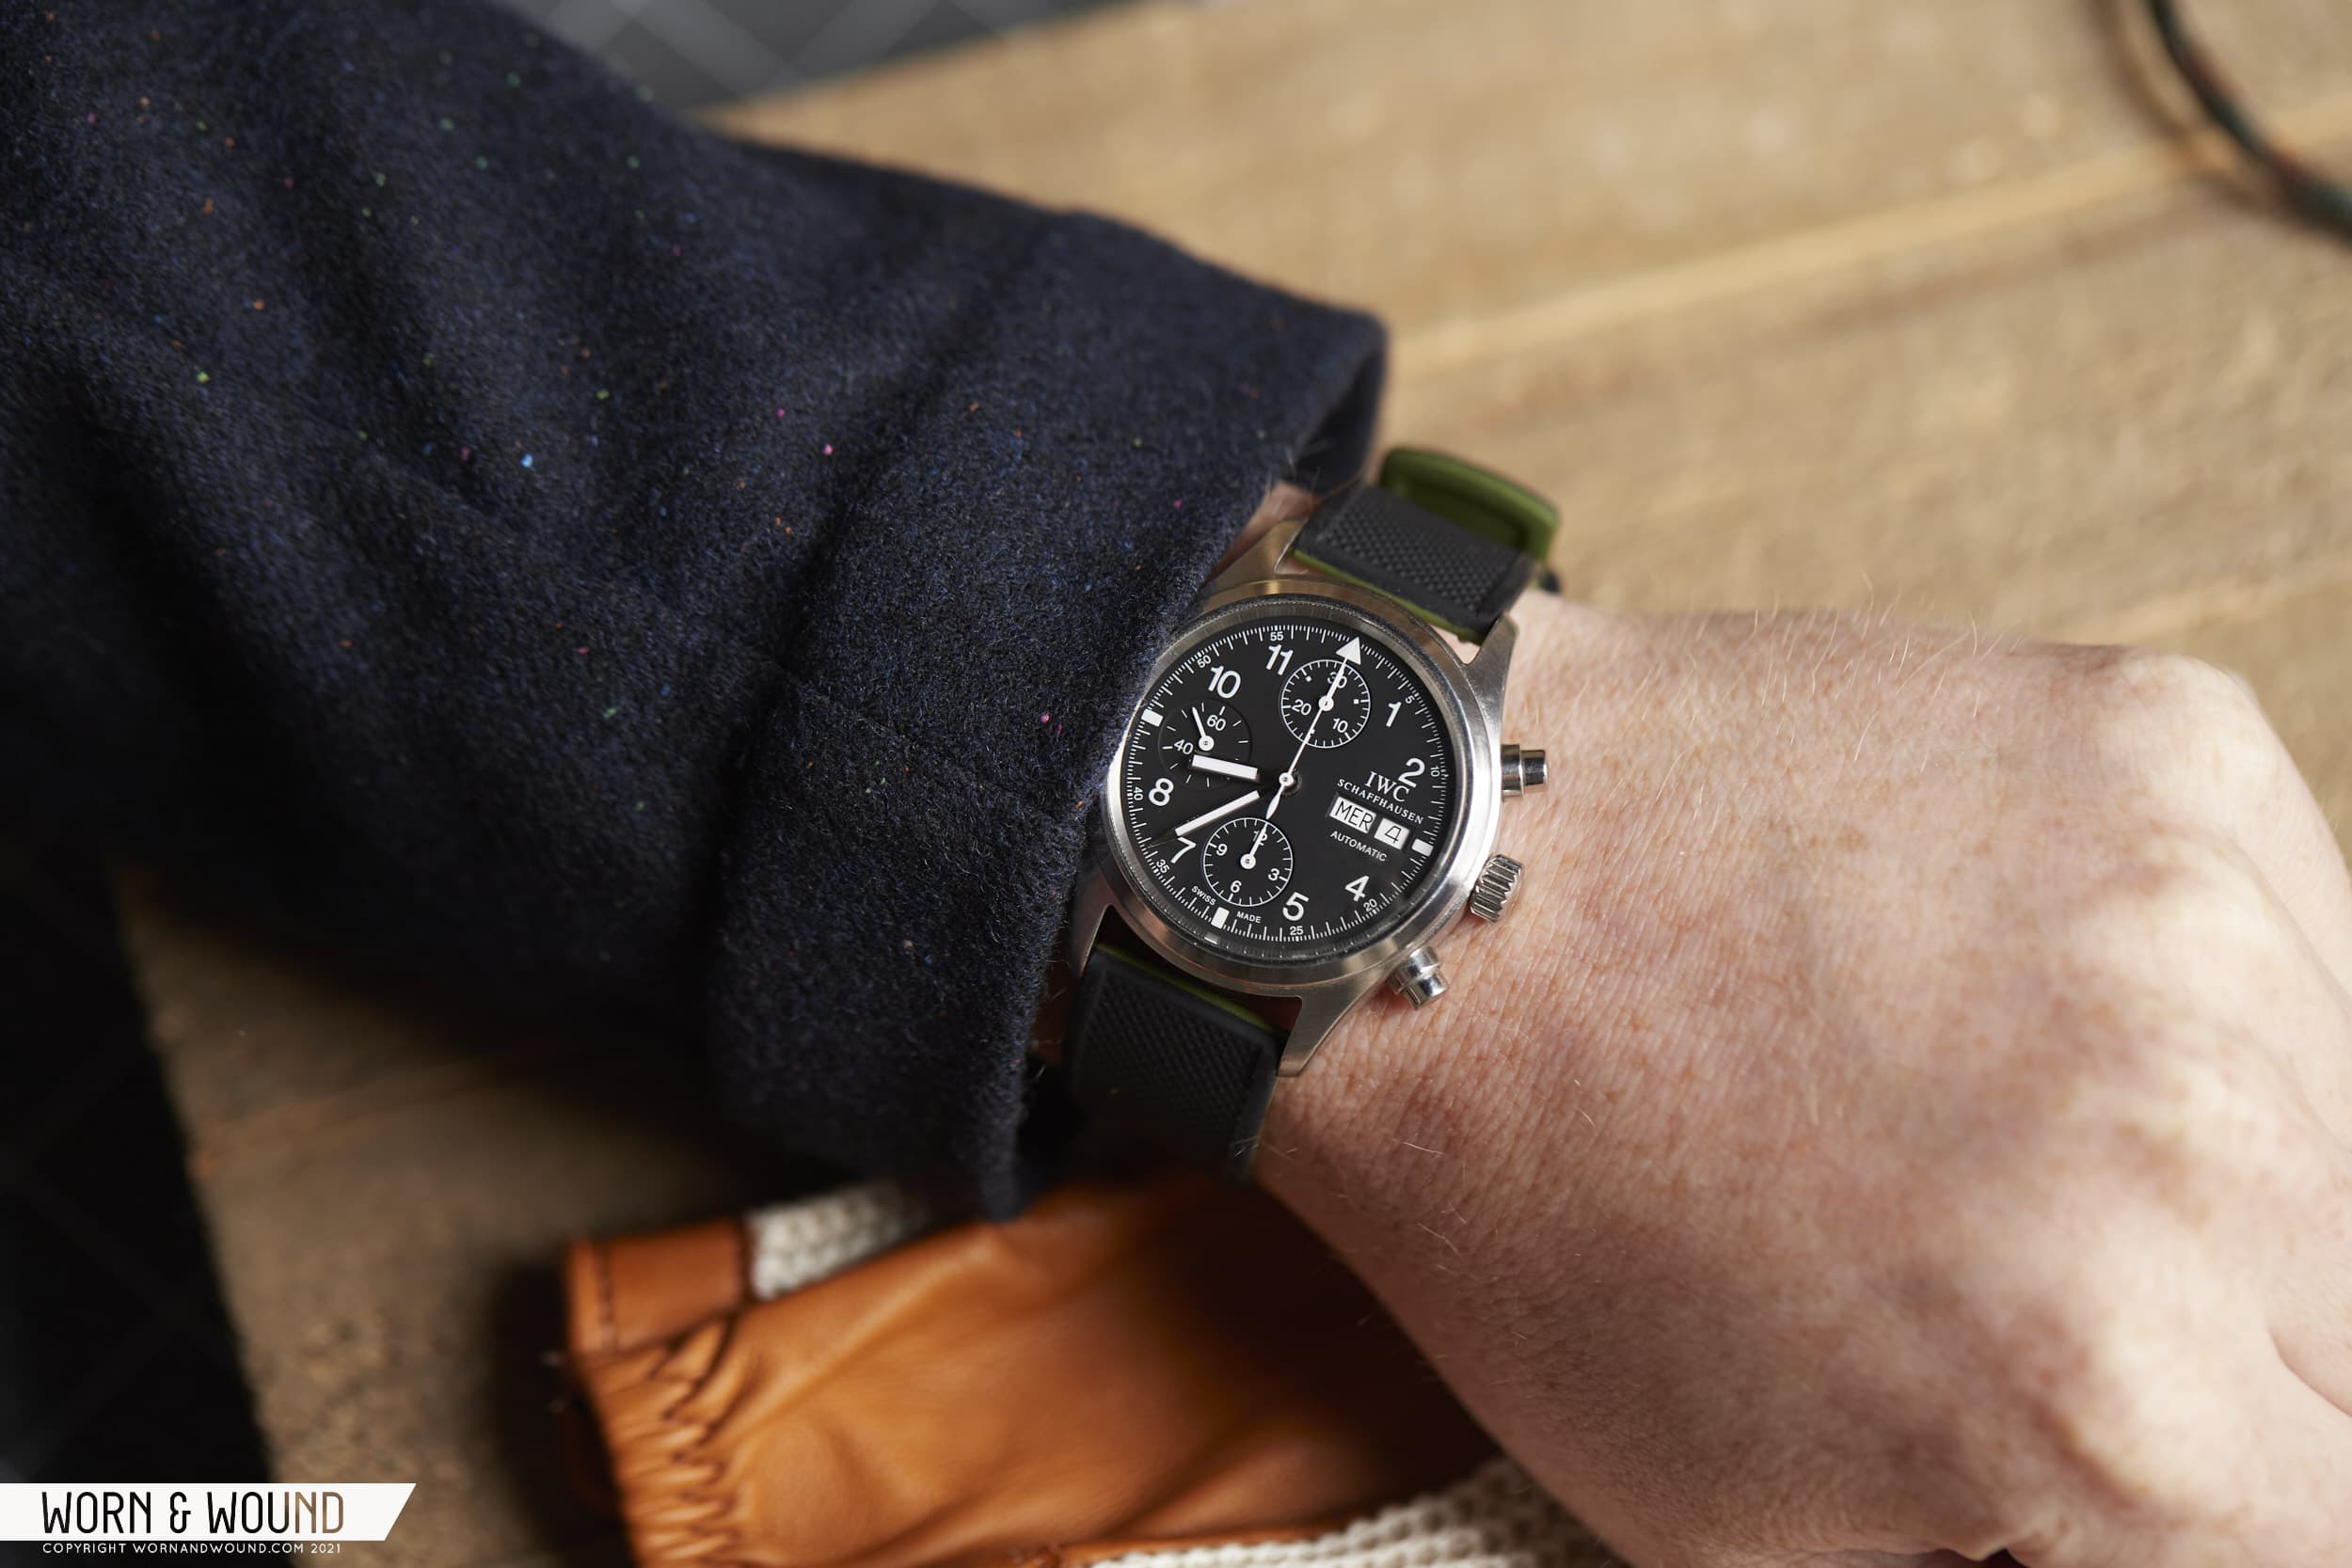 Missed Reviews: The 3706 “Fliegerchronograph” is a Reminder of What IWC Used to Be